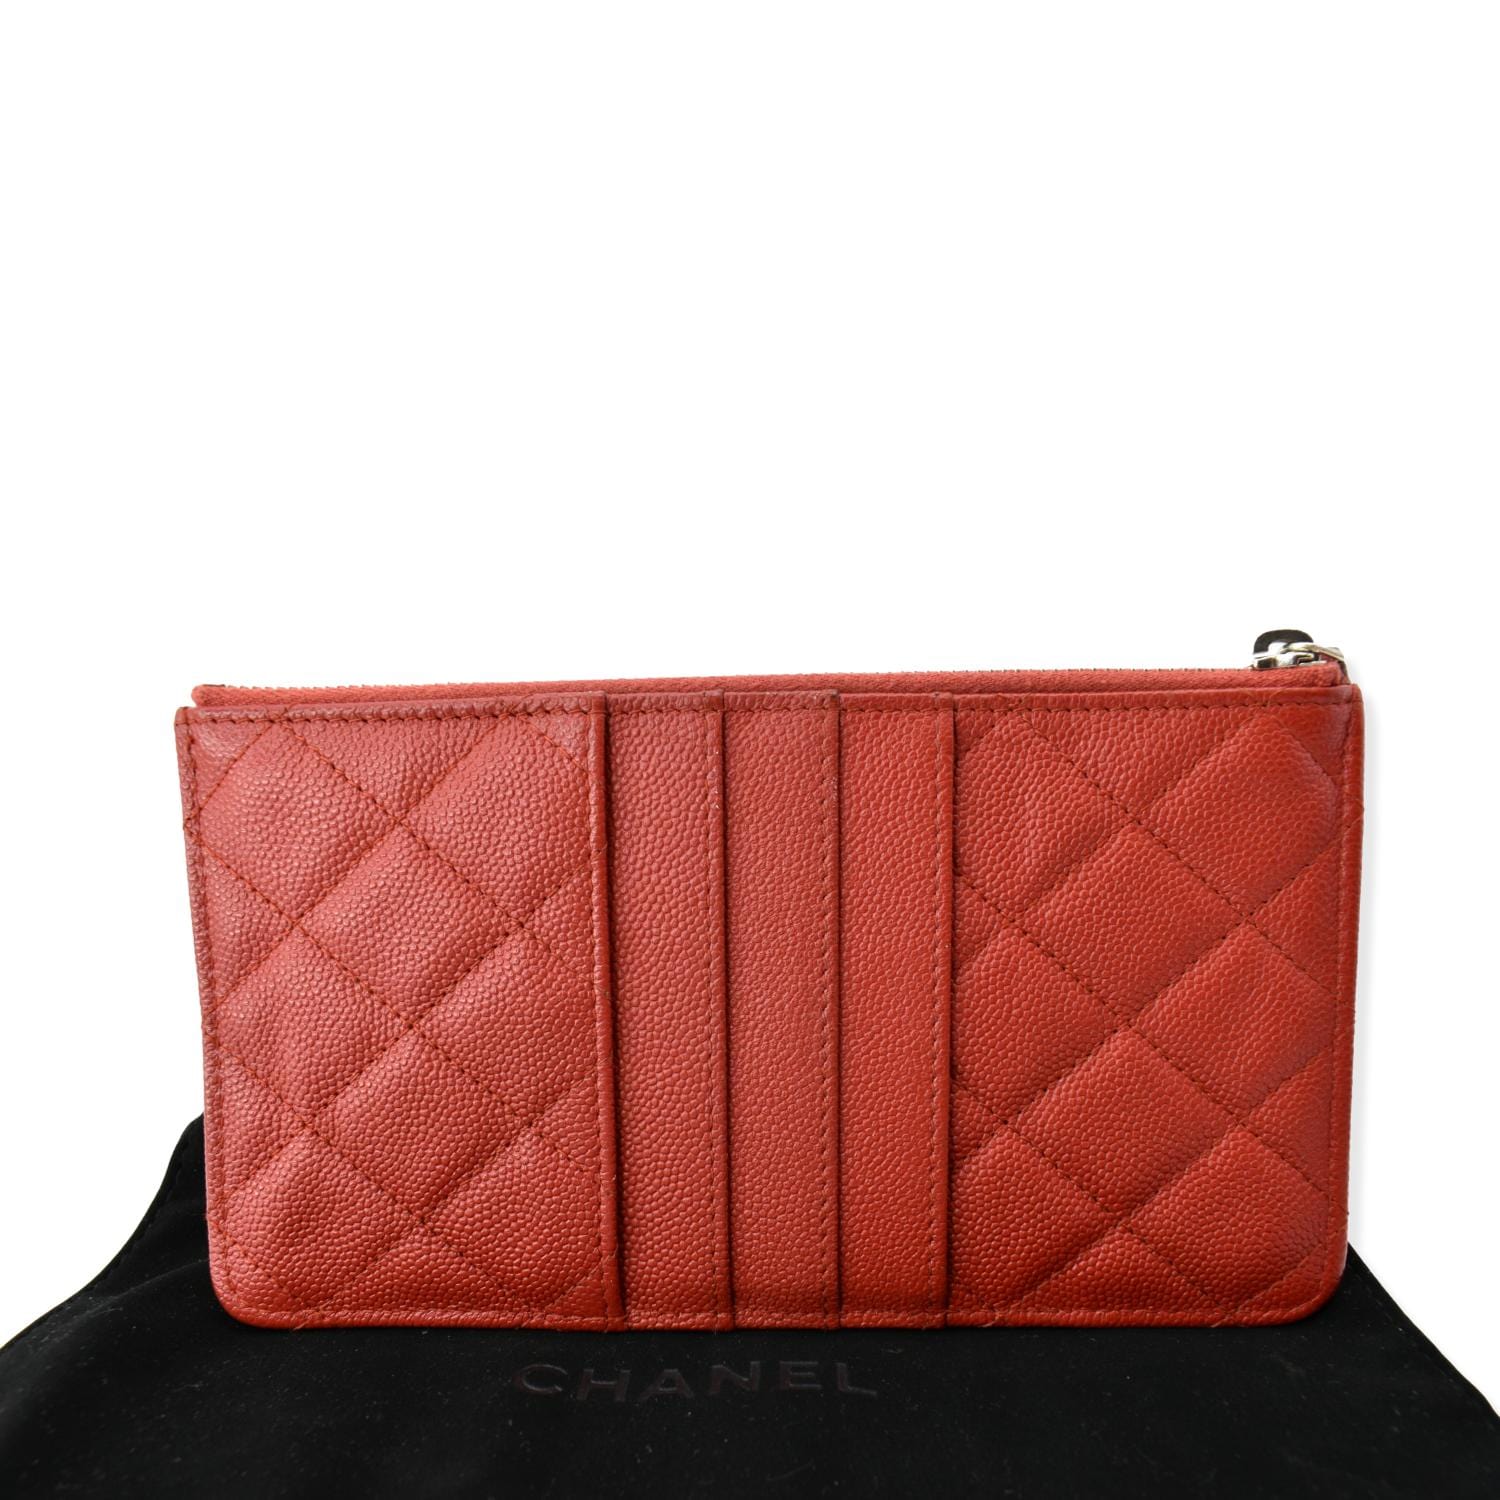 CHANEL Classic Caviar Quilted Leather Wallet Pouch Red 10% OFF